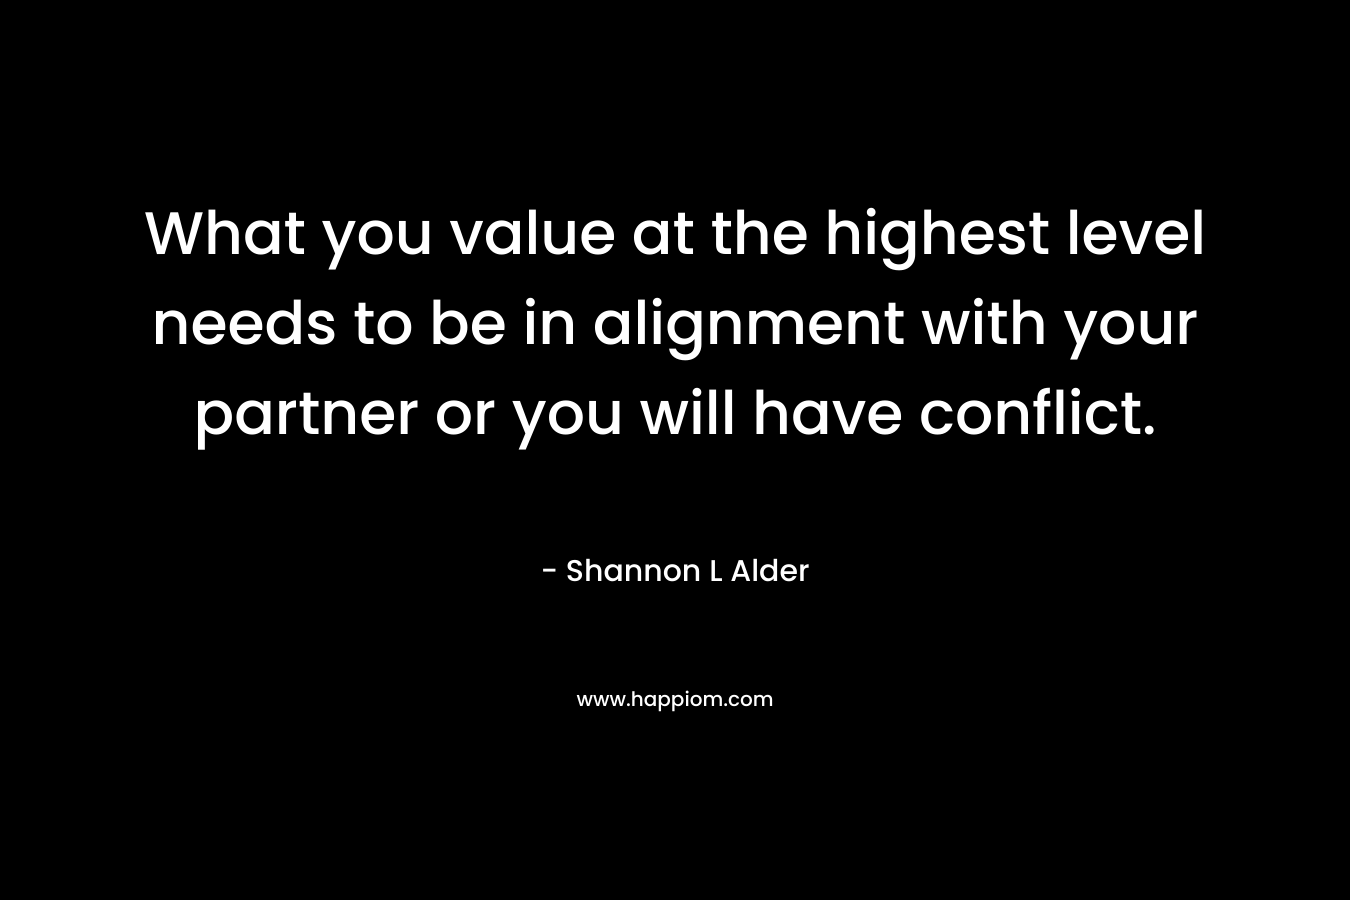 What you value at the highest level needs to be in alignment with your partner or you will have conflict.